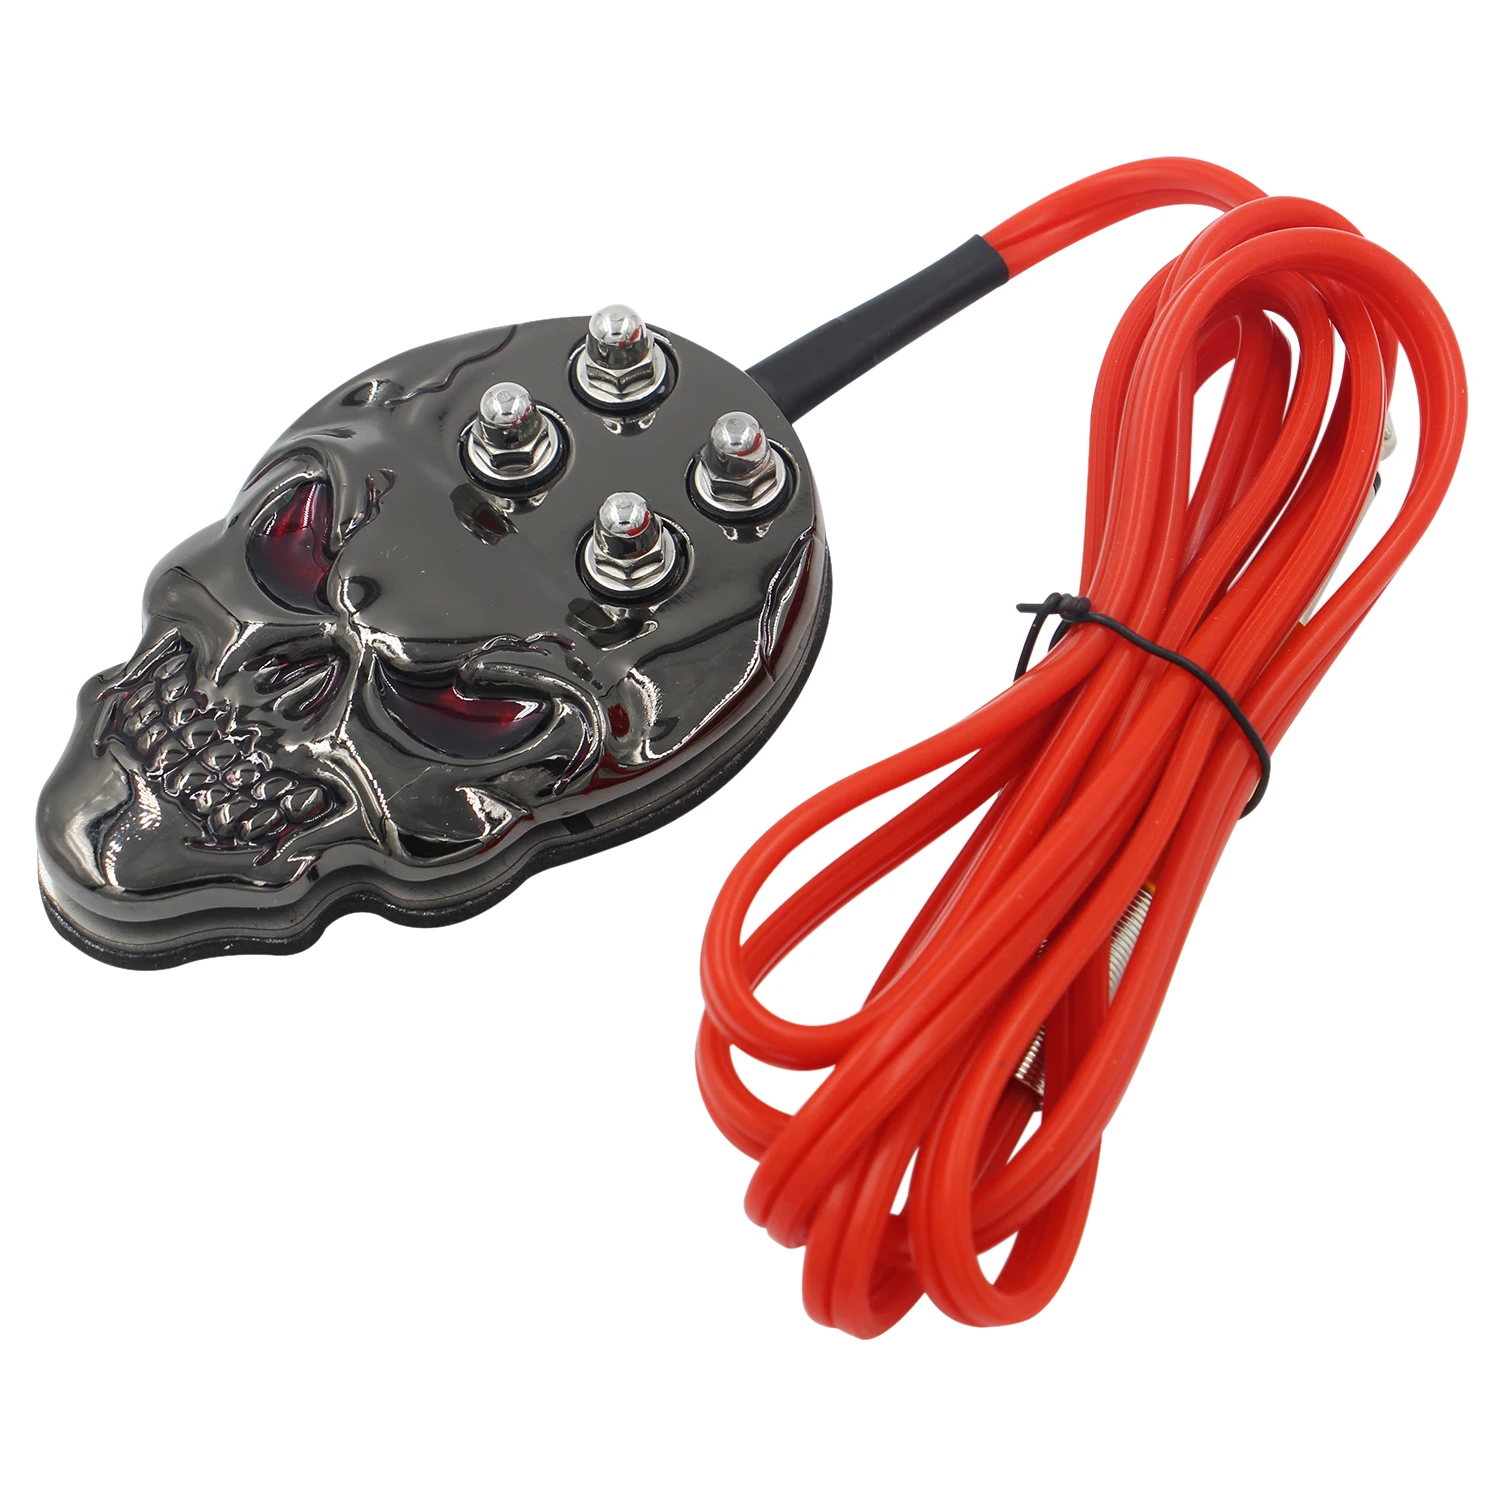 Stainless Steel Skull Tattoo Foot Switch Tattoo Pedal For Tattoo Power Supply Free Shipping